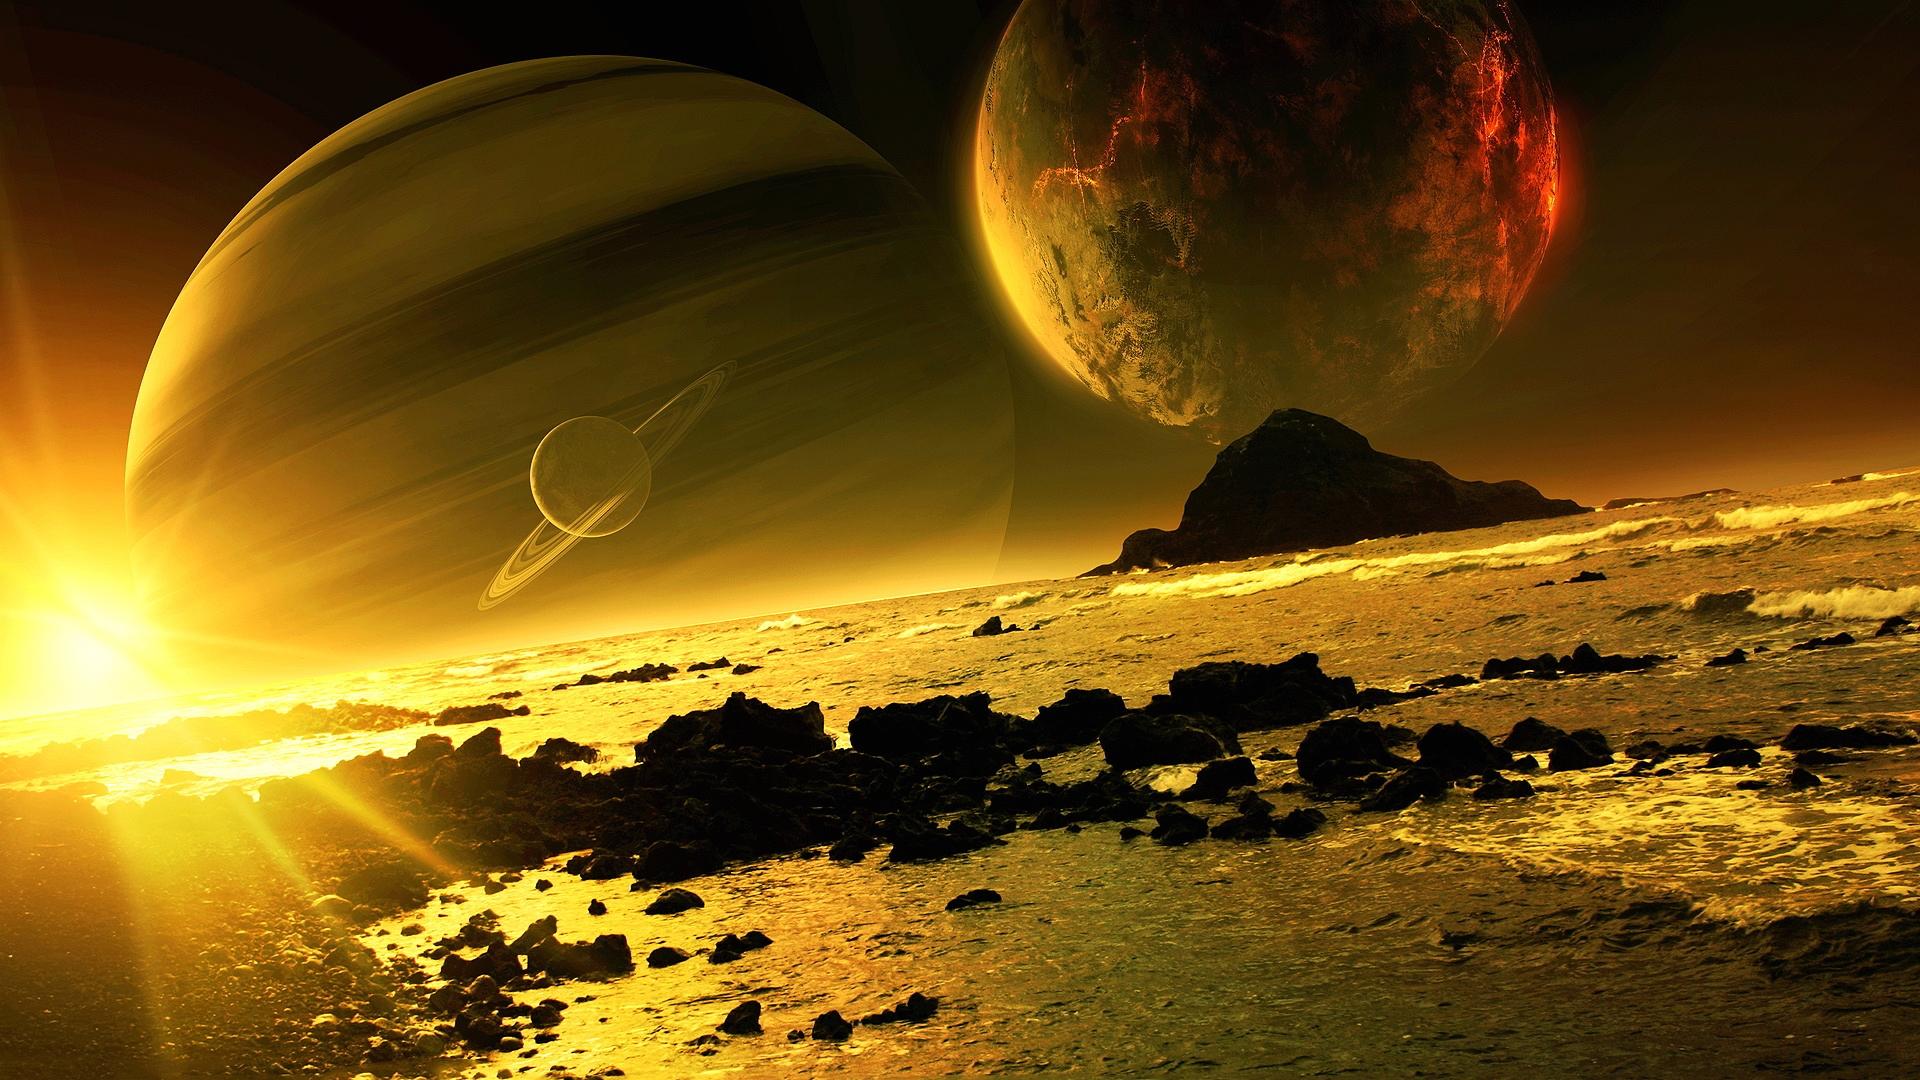 Free download Planets Wallpaper 33 Planets Image for 2MTX [1920x1080] for your Desktop, Mobile & Tablet. Explore Planets Wallpaper. Little Big Planet Wallpaper, HD Space Wallpaper 1080p, HD Space Wallpaper